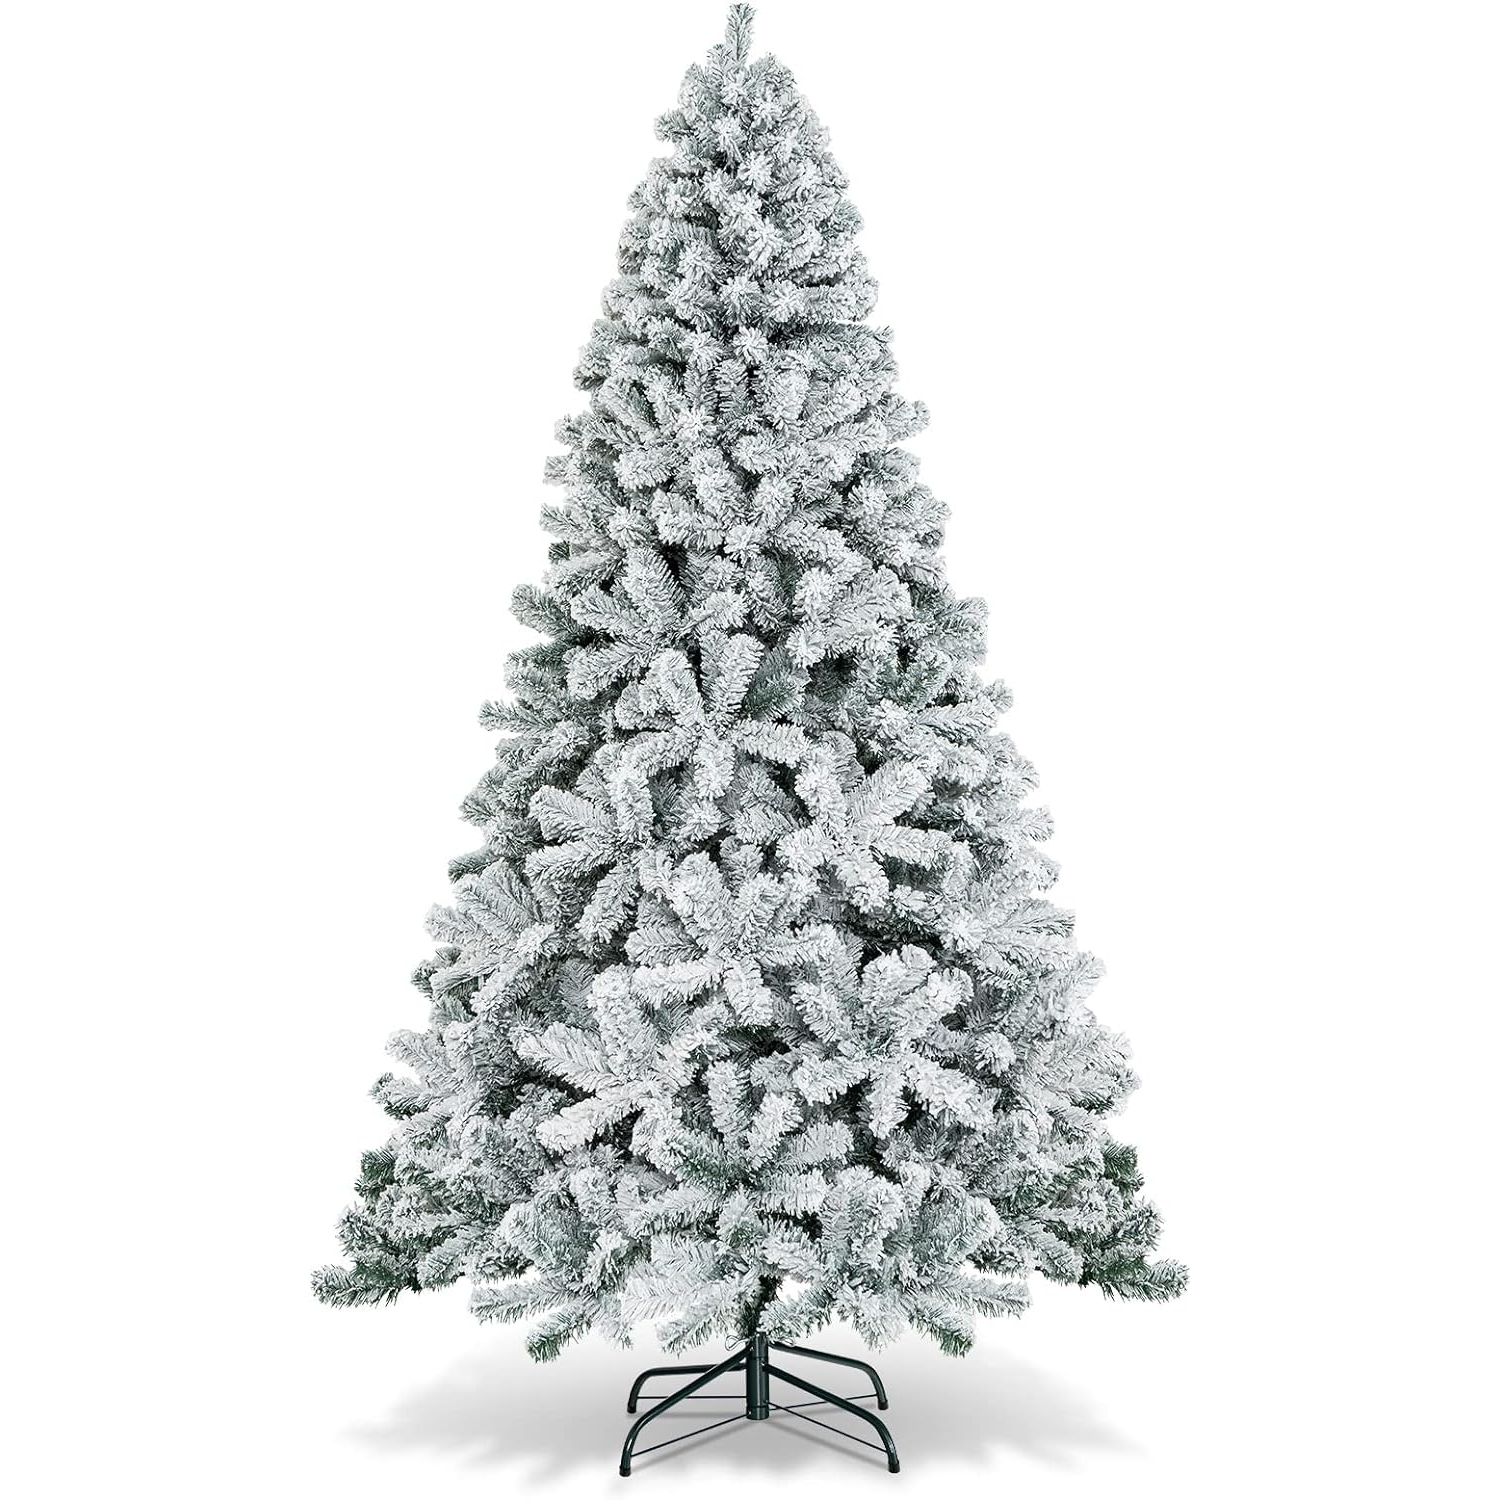 6FT Artificial Christmas Tree Snow Flocked, Holiday Xmas White Tree Decoration Pine Tree with 800 Branch Tips W/ Metal Stand & Gloves